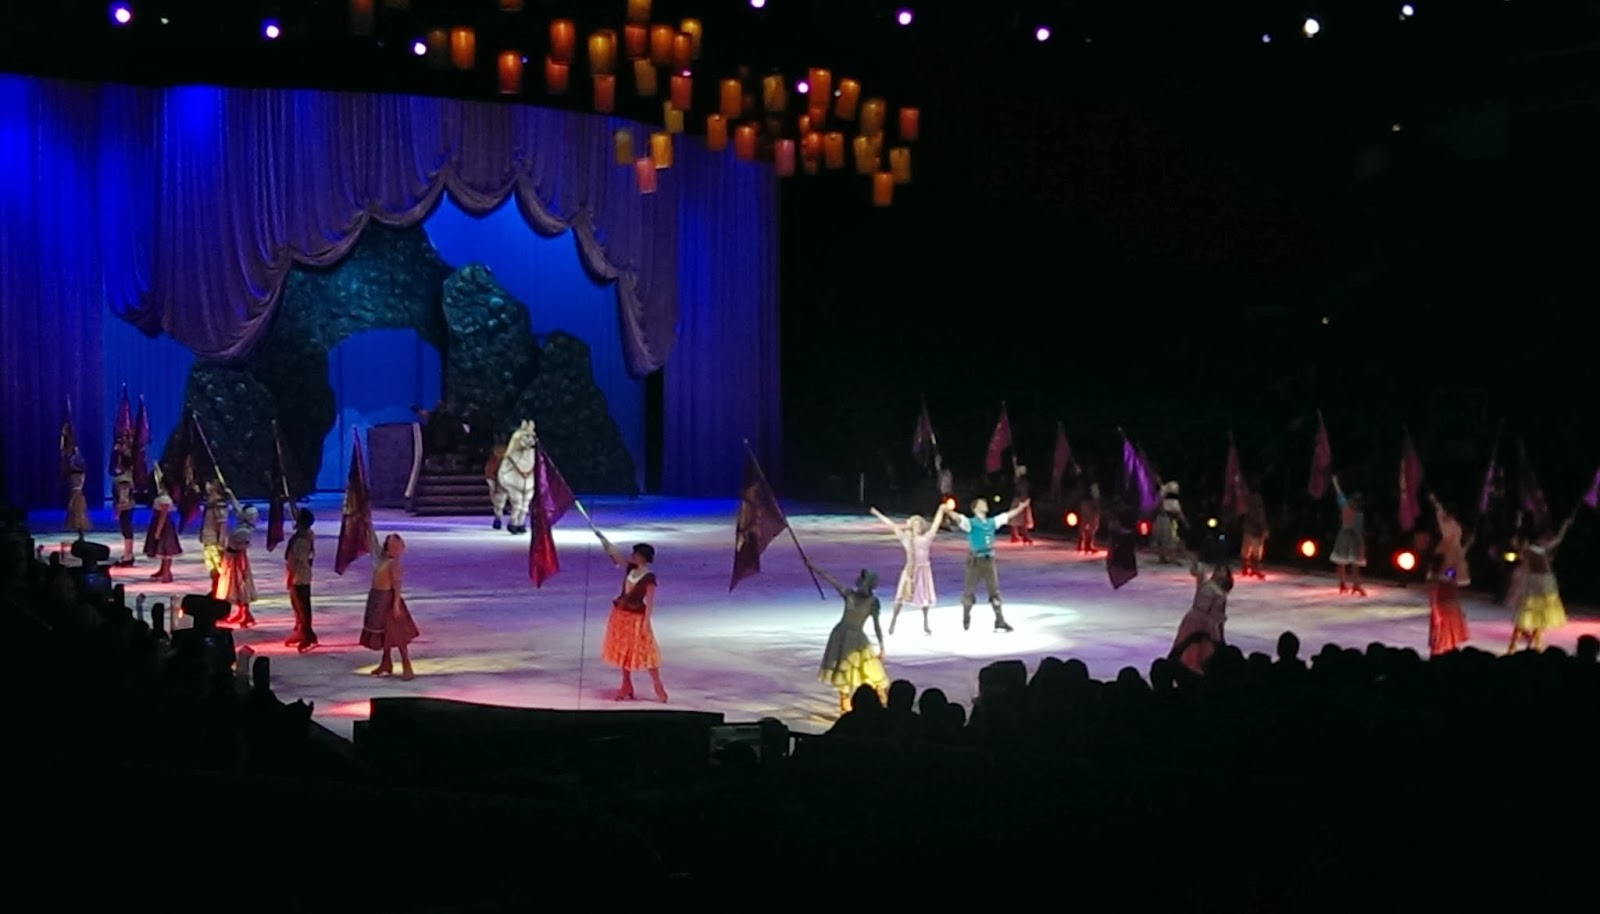 Disney on Ice Presents Rockin Ever After